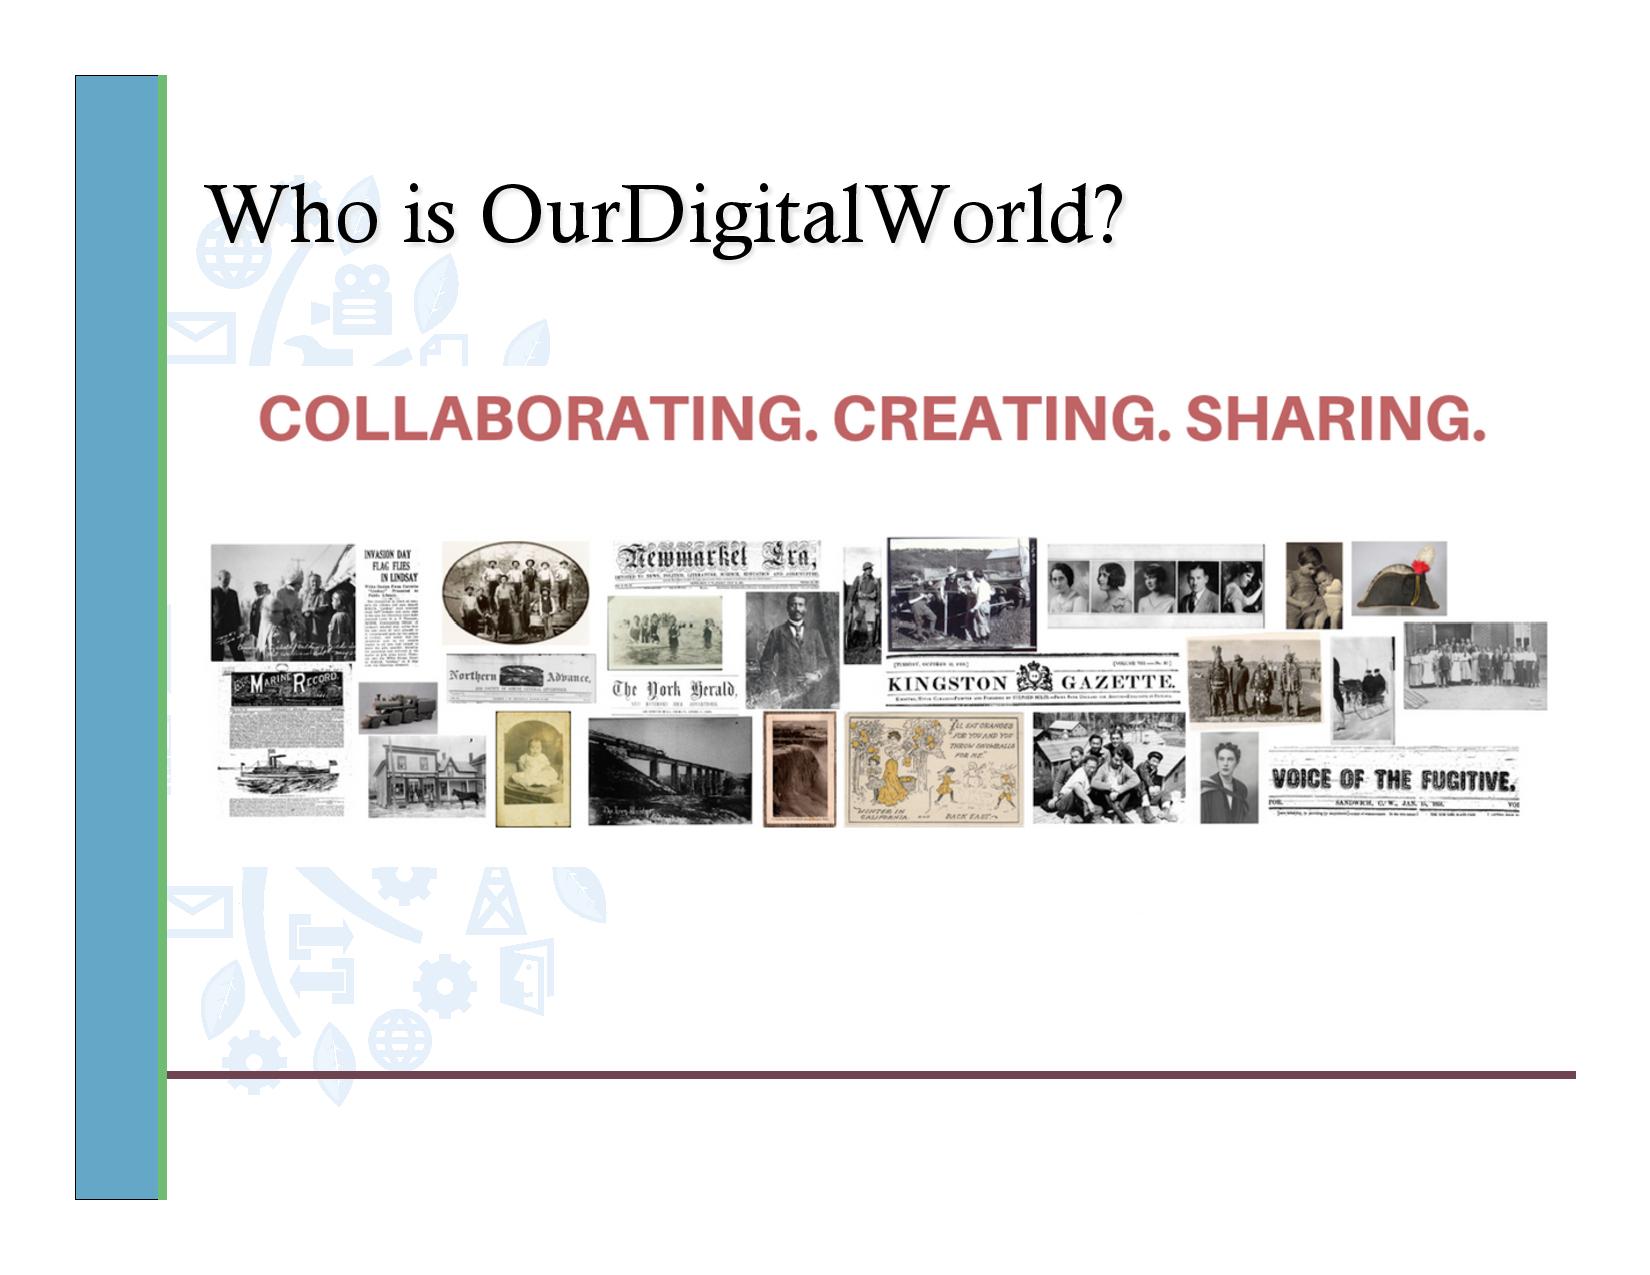 Who is our digital world